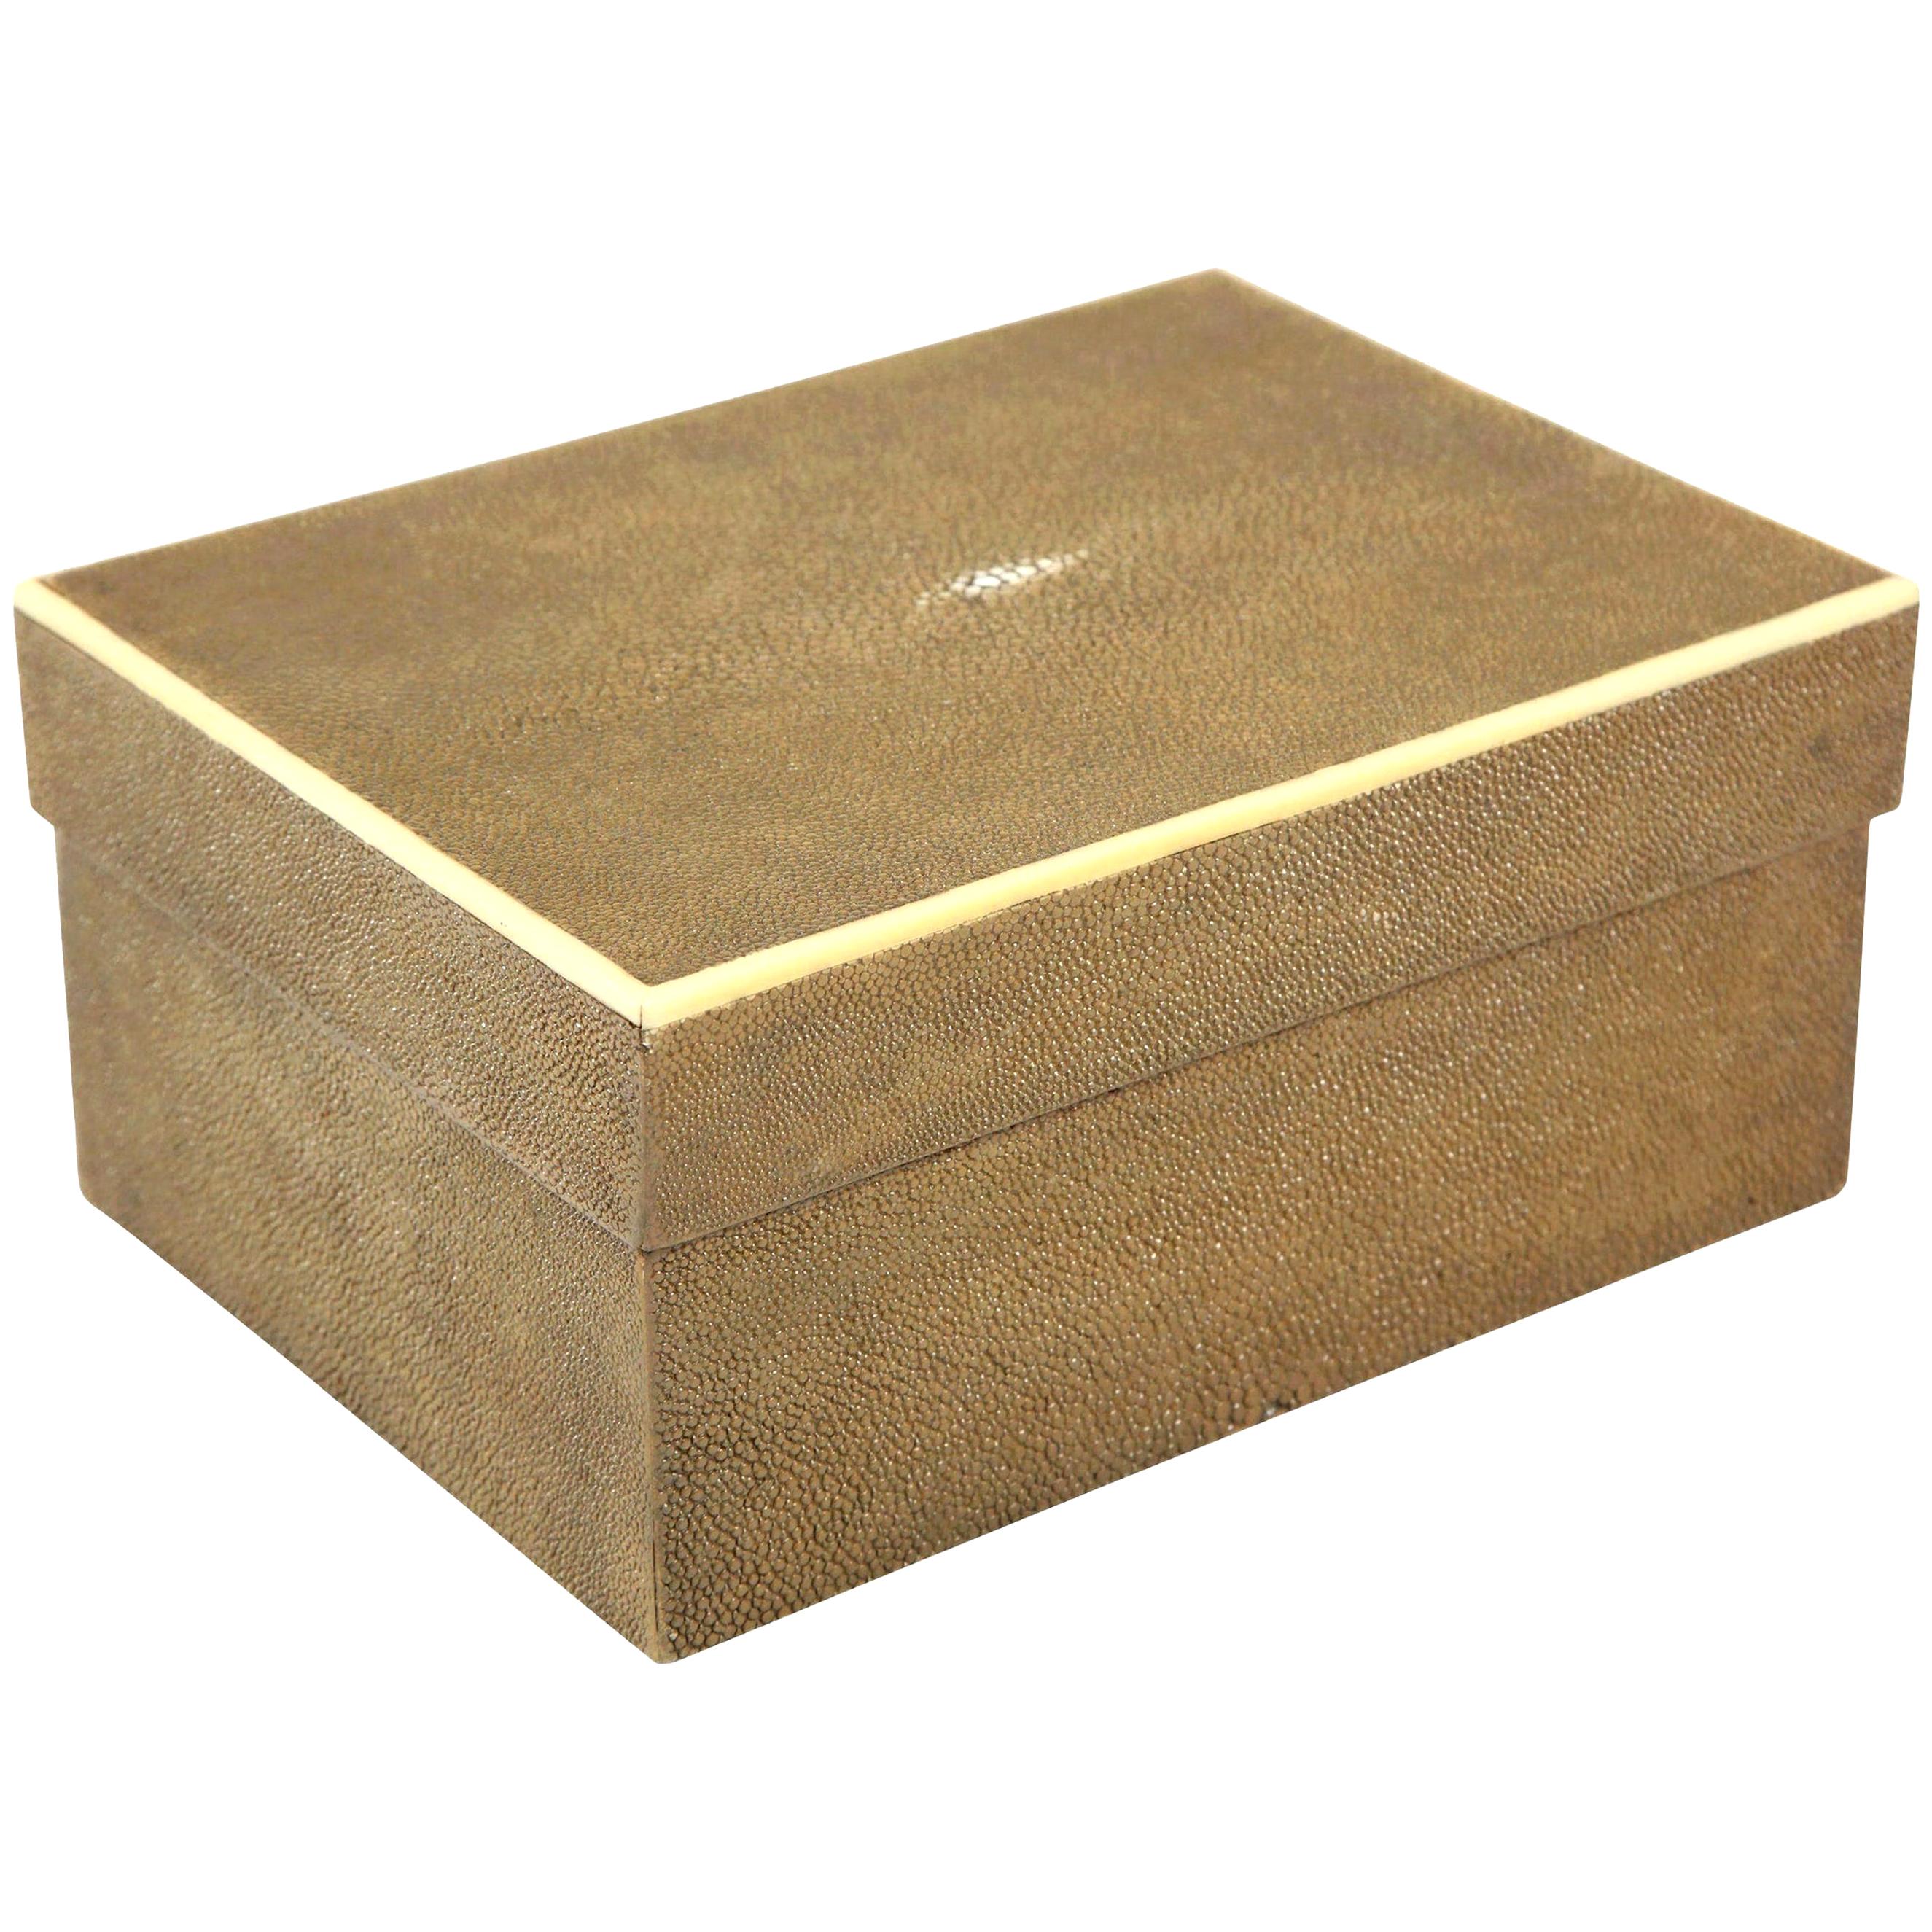 Decorative shagreen box with cream colored inlay. Beautiful shagreen work. Designed in France. We have the shagreen box in stock. Shoe box design.